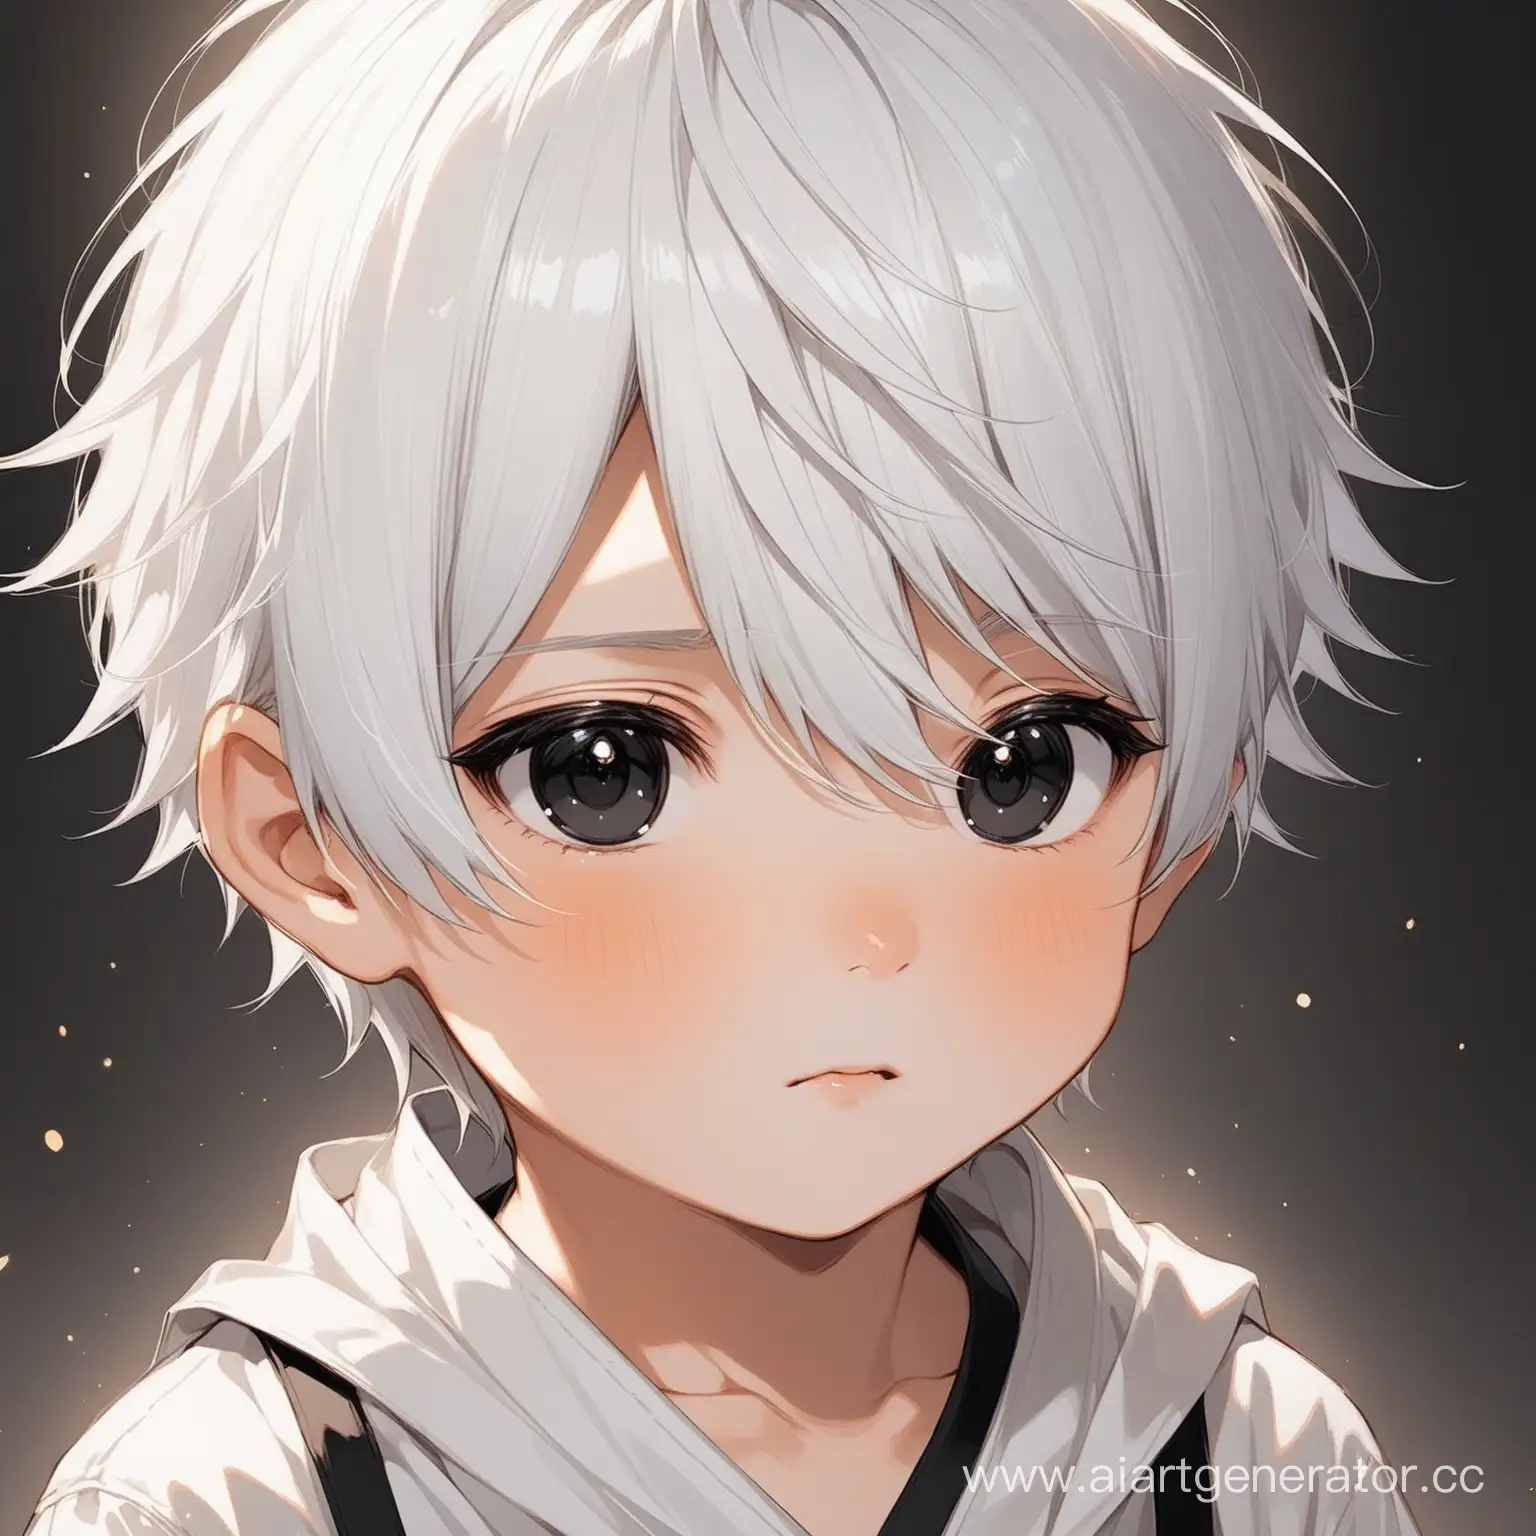 Adorable-Little-Boy-with-Unique-Appearance-WhiteHaired-Child-with-Piercing-Black-Eyes